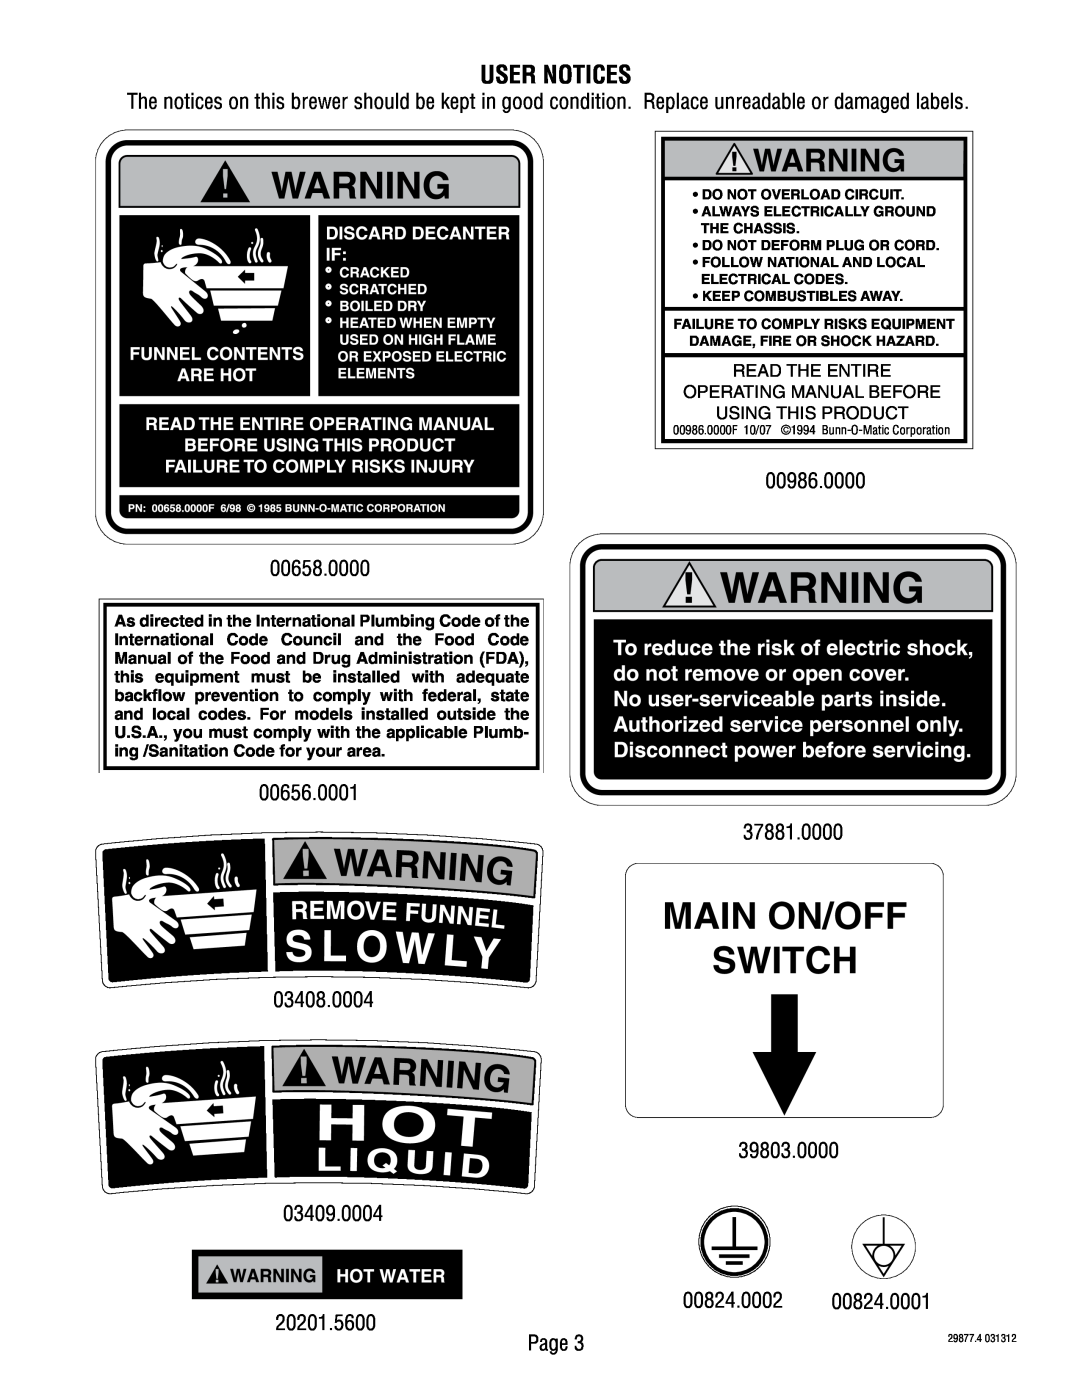 Bunn DUAL068000 manual User Notices, Main On/Off Switch 